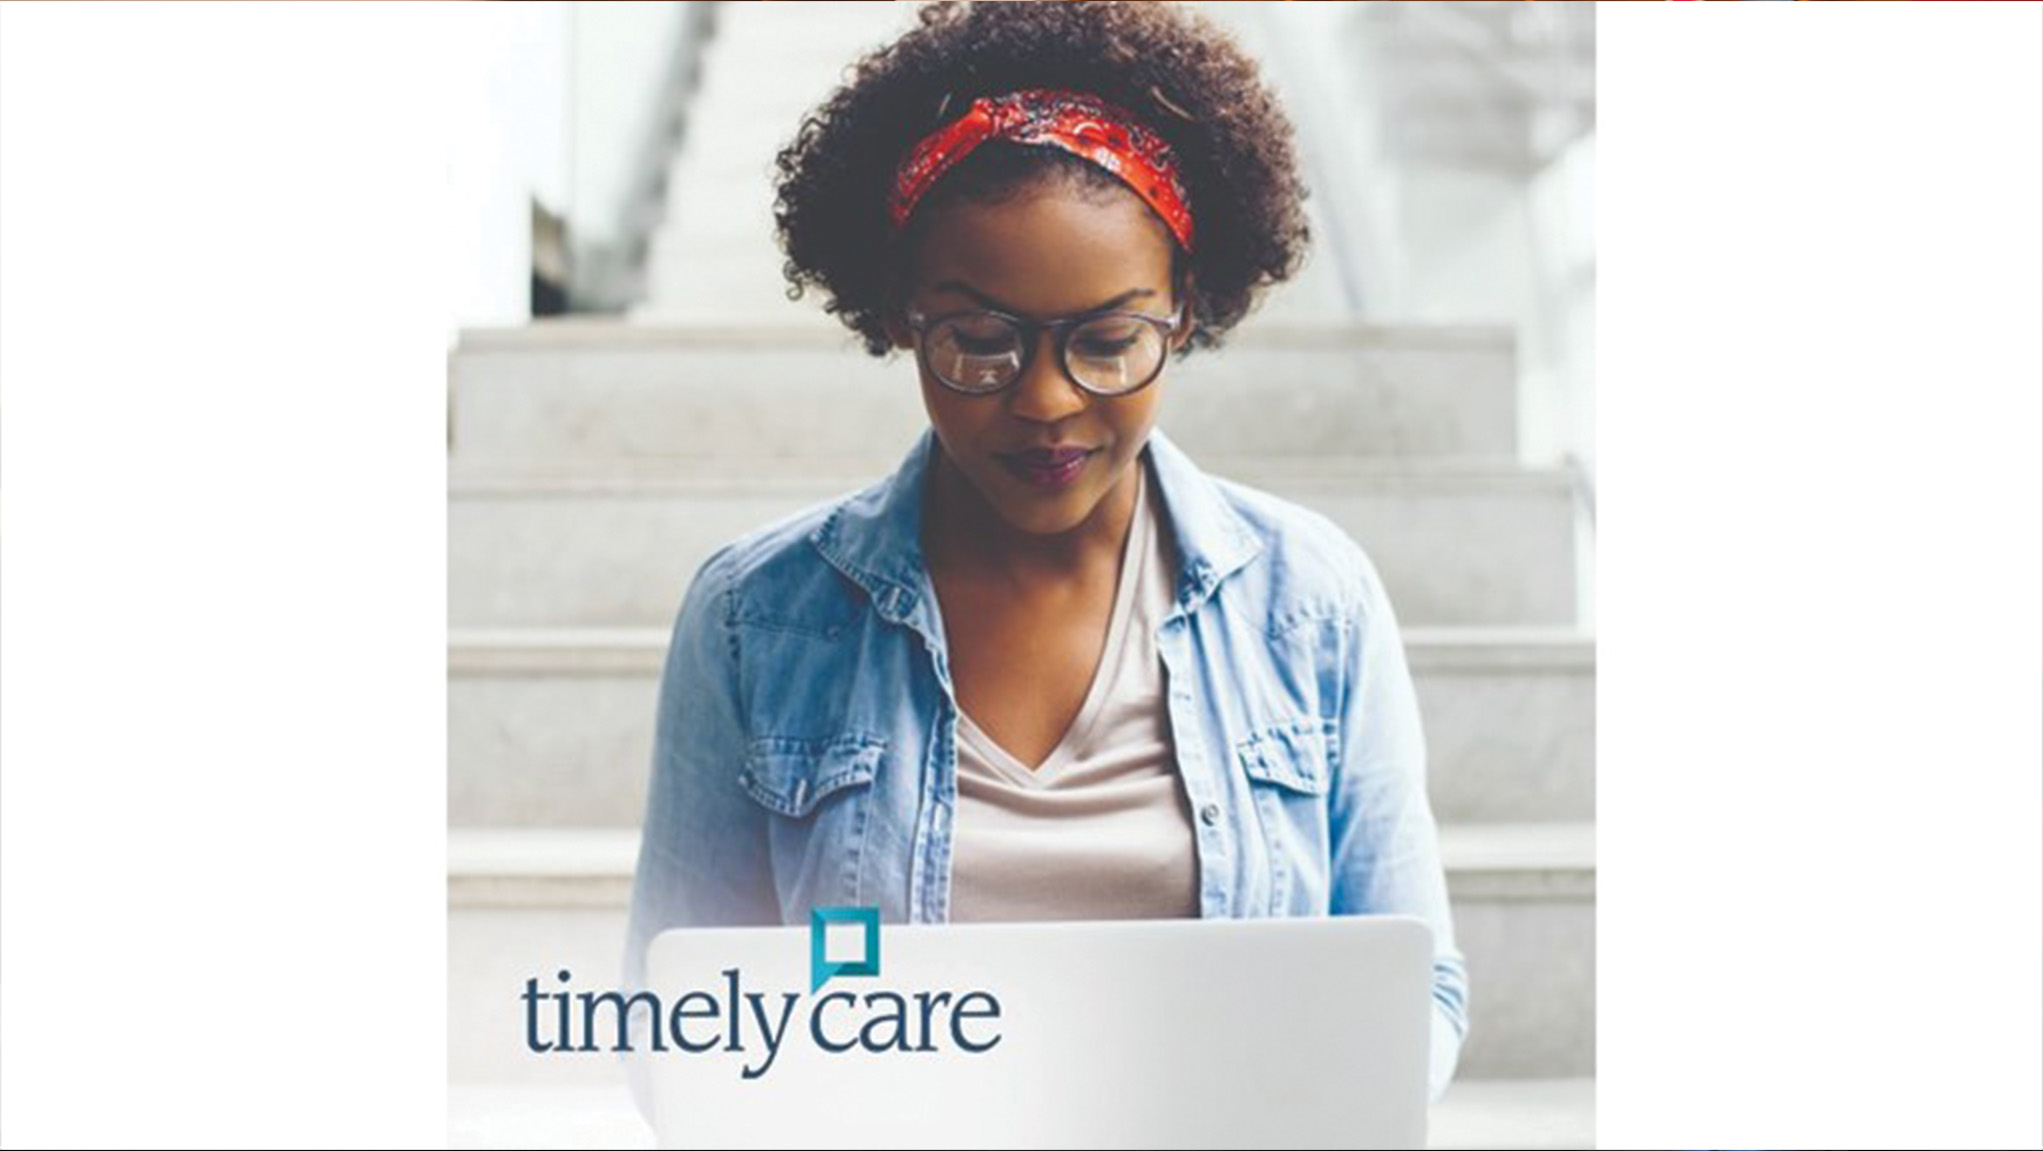 Woman looking down at laptop and the text "timely care"